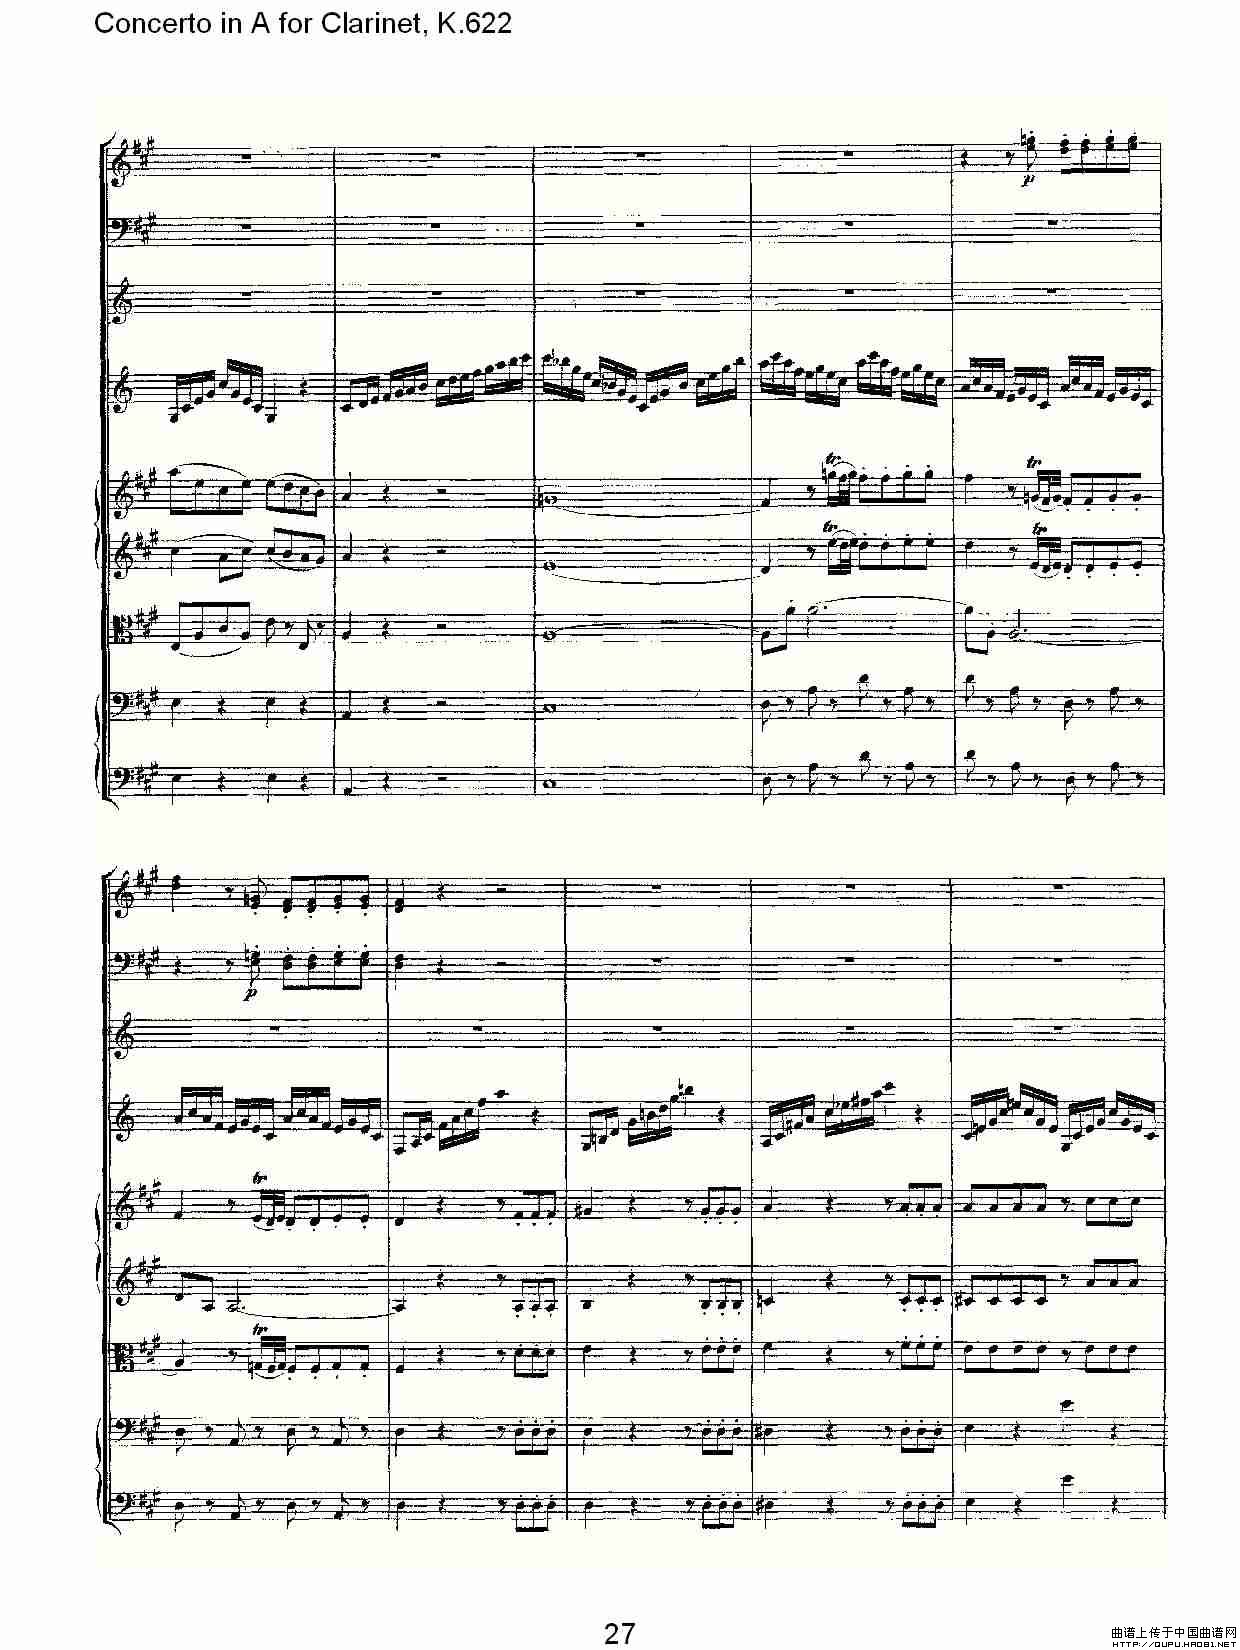 Concerto in A for Clarinet, K.622（A调单簧管协奏曲, K